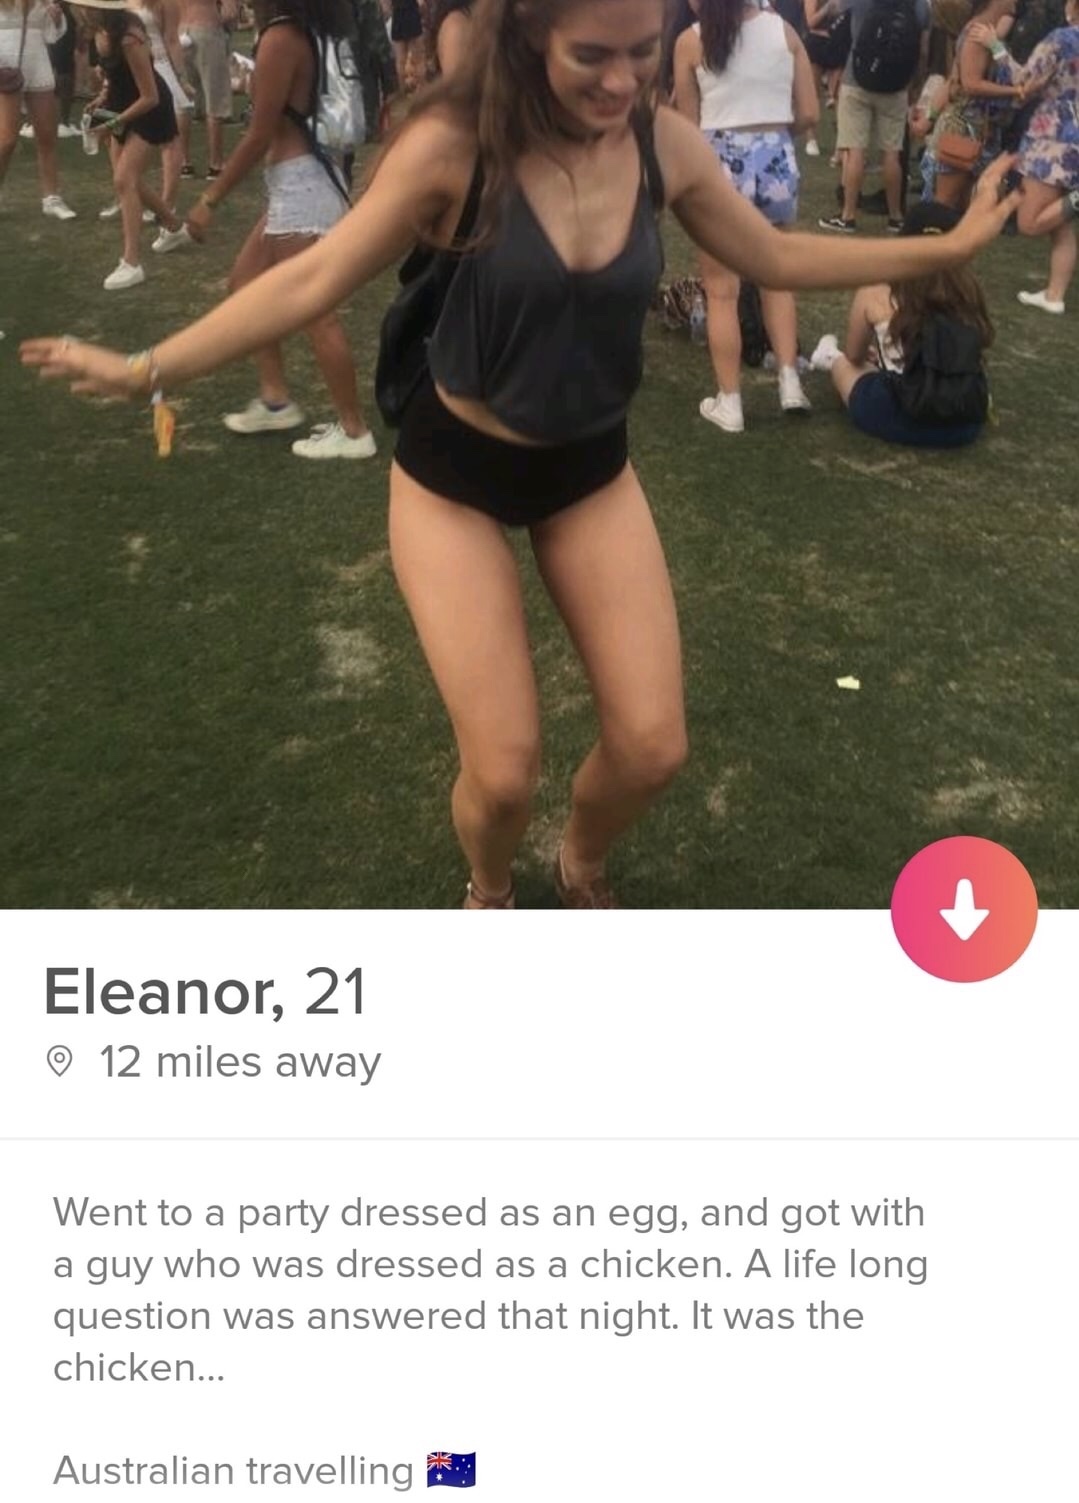 memes - funny tinder bios - Eleanor, 21 12 miles away Went to a party dressed as an egg, and got with a guy who was dressed as a chicken. A life long question was answered that night. It was the chicken... Australian travelling